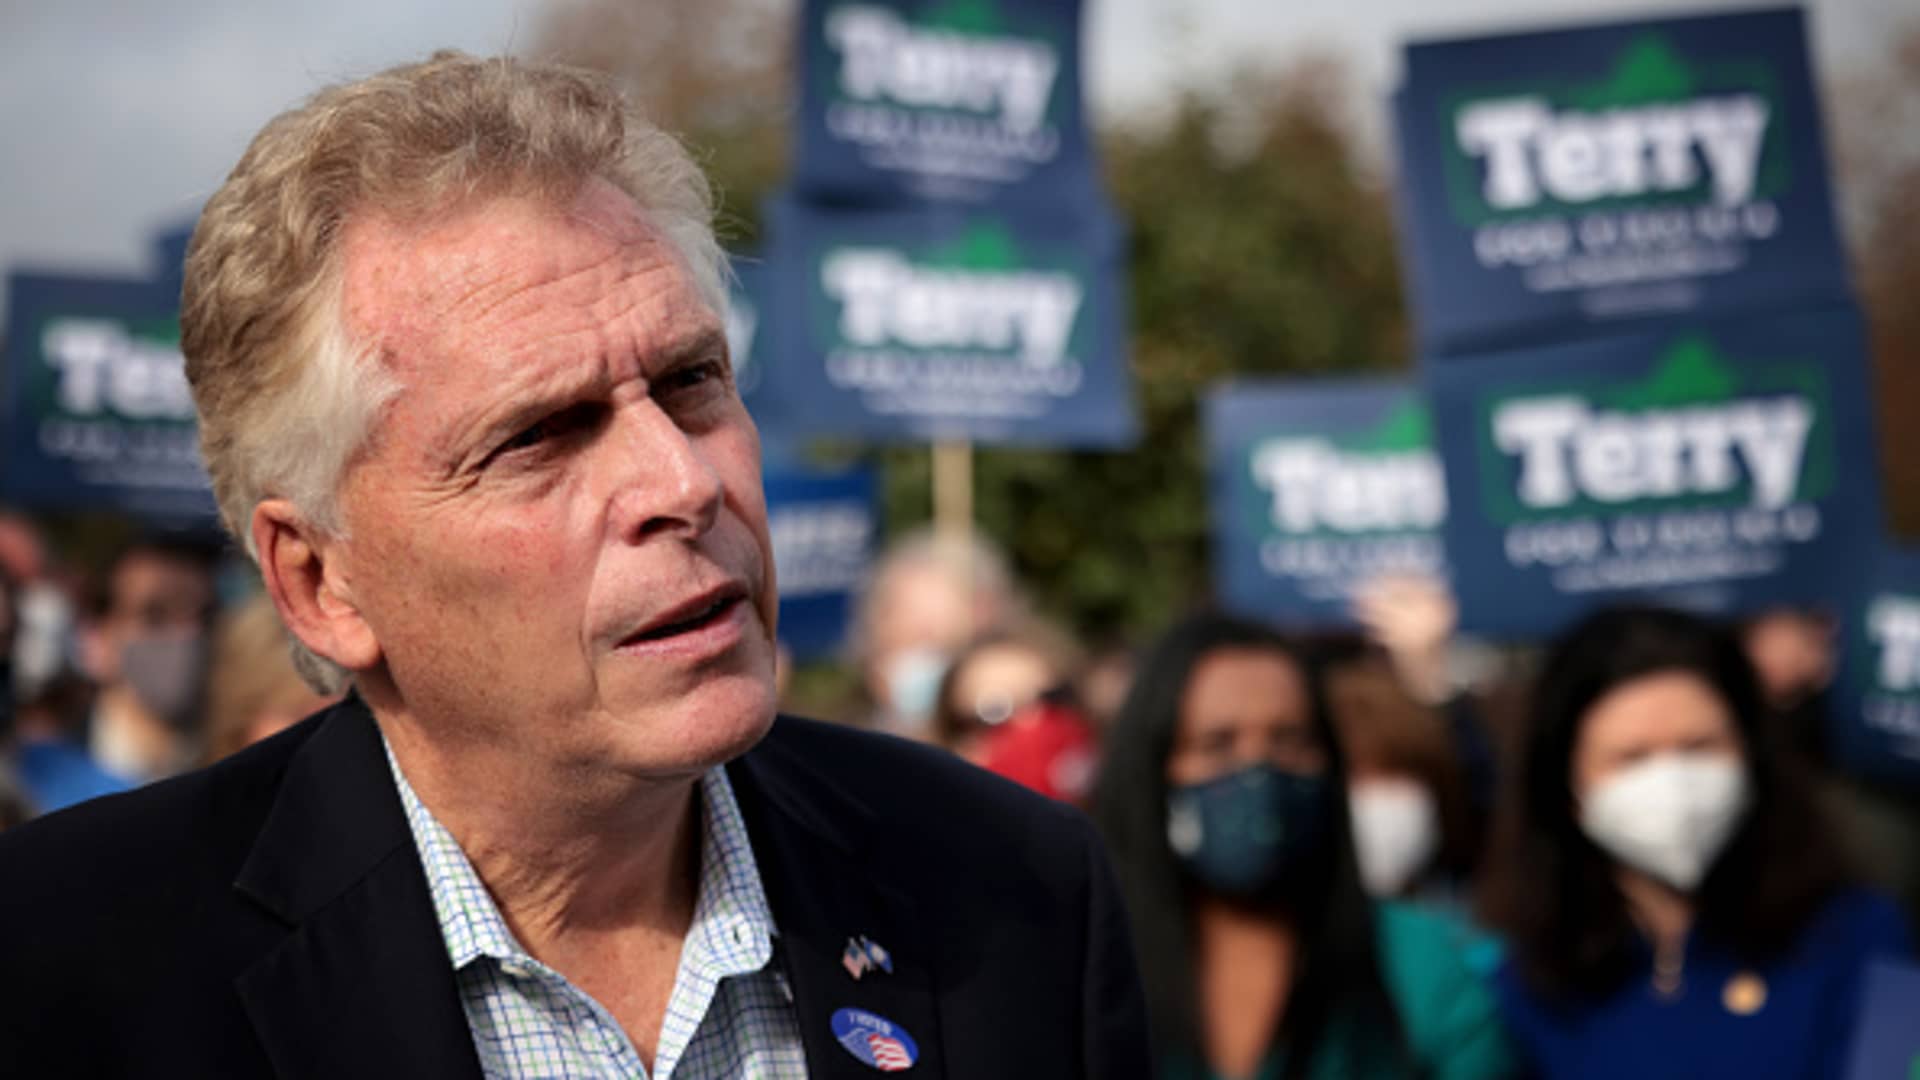 Former Virginia Gov. Terry McAuliffe, Democratic gubernatorial candidate for Virginia for a second term, answers questions from reporters after casting his ballot during early voting at the Fairfax County Government Center October 13, 2021 in Fairfax, Virginia.